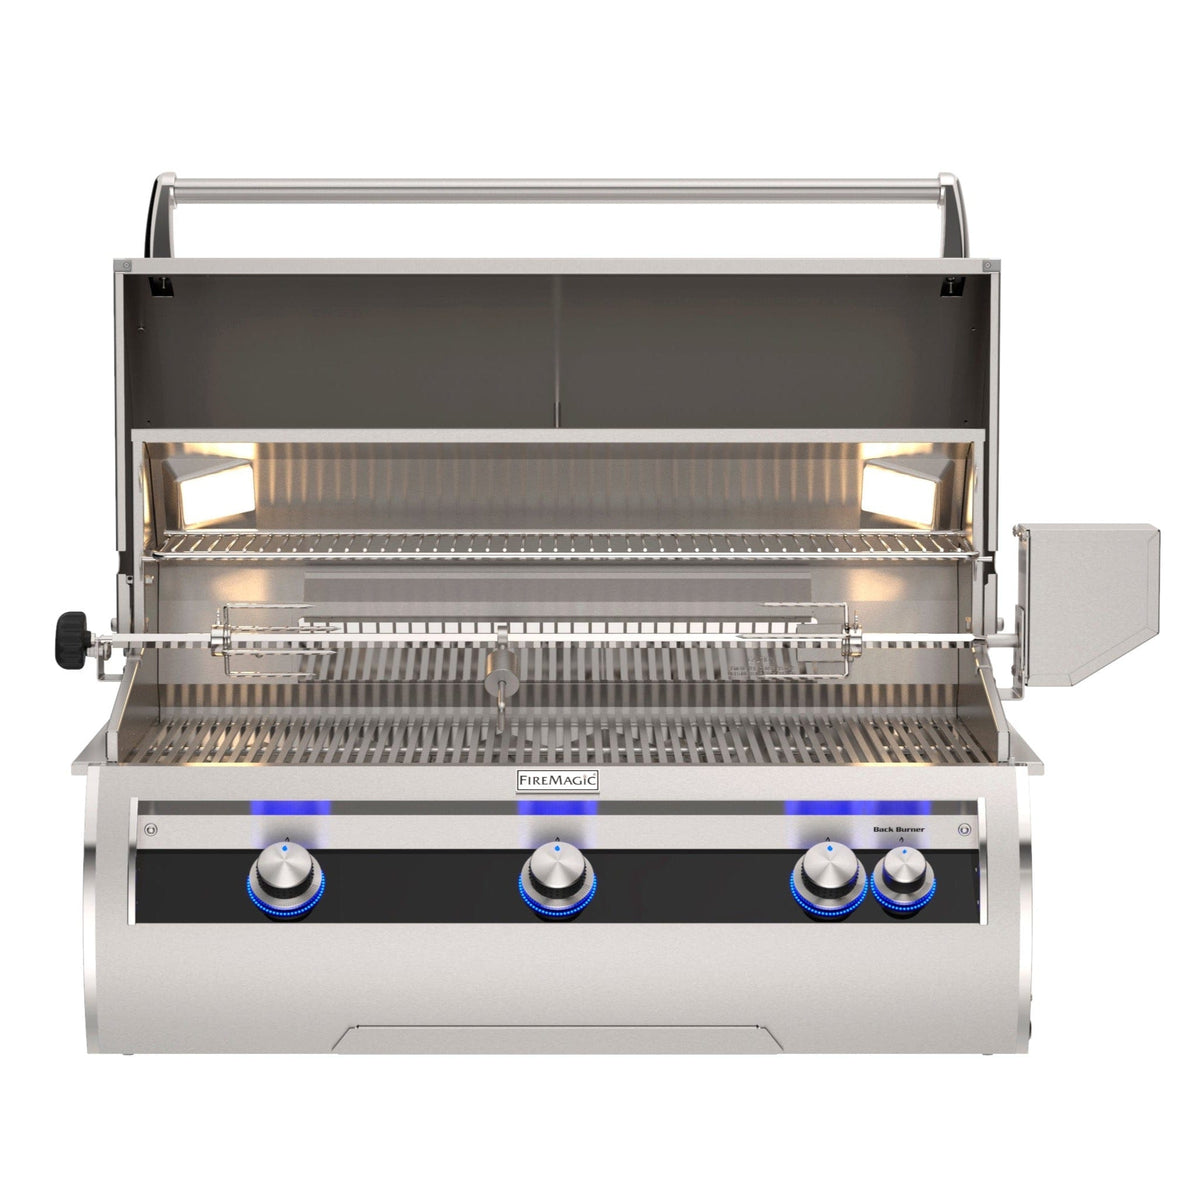 Firemagic Grills Fire Magic Echelon Diamond E790i Built-In Grill with Rotisserie and Analog Thermometer / E790i-9EAN(P), E790i-9LAN(P), E790i-9EAN(P)-W, E790i-9LAN(P)-W